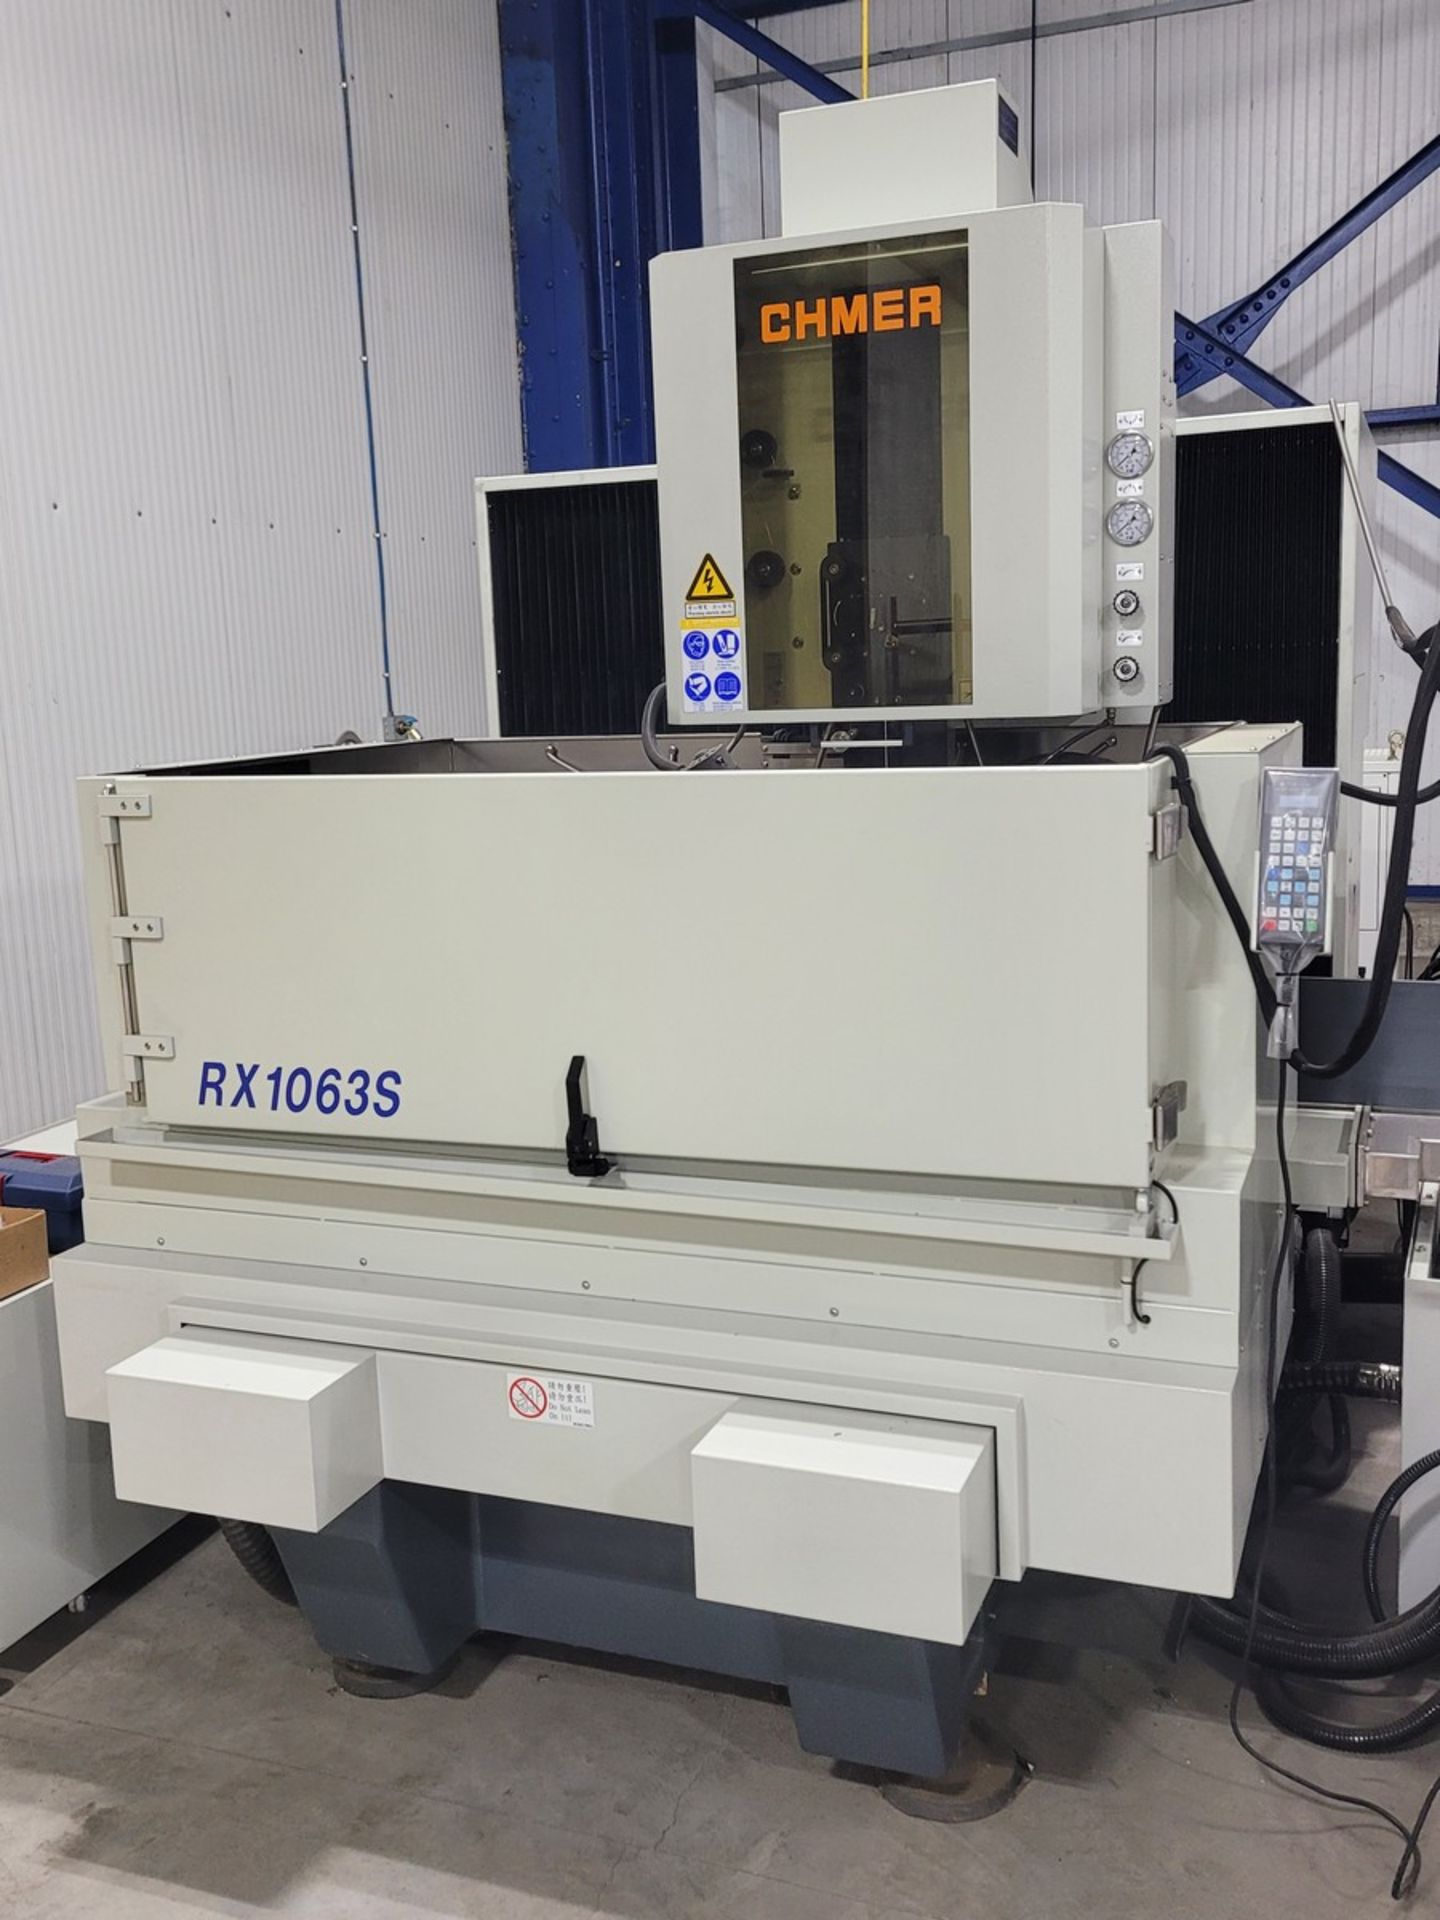 Chmer RX-1063S CNC Wire Cut EDM - Image 3 of 20